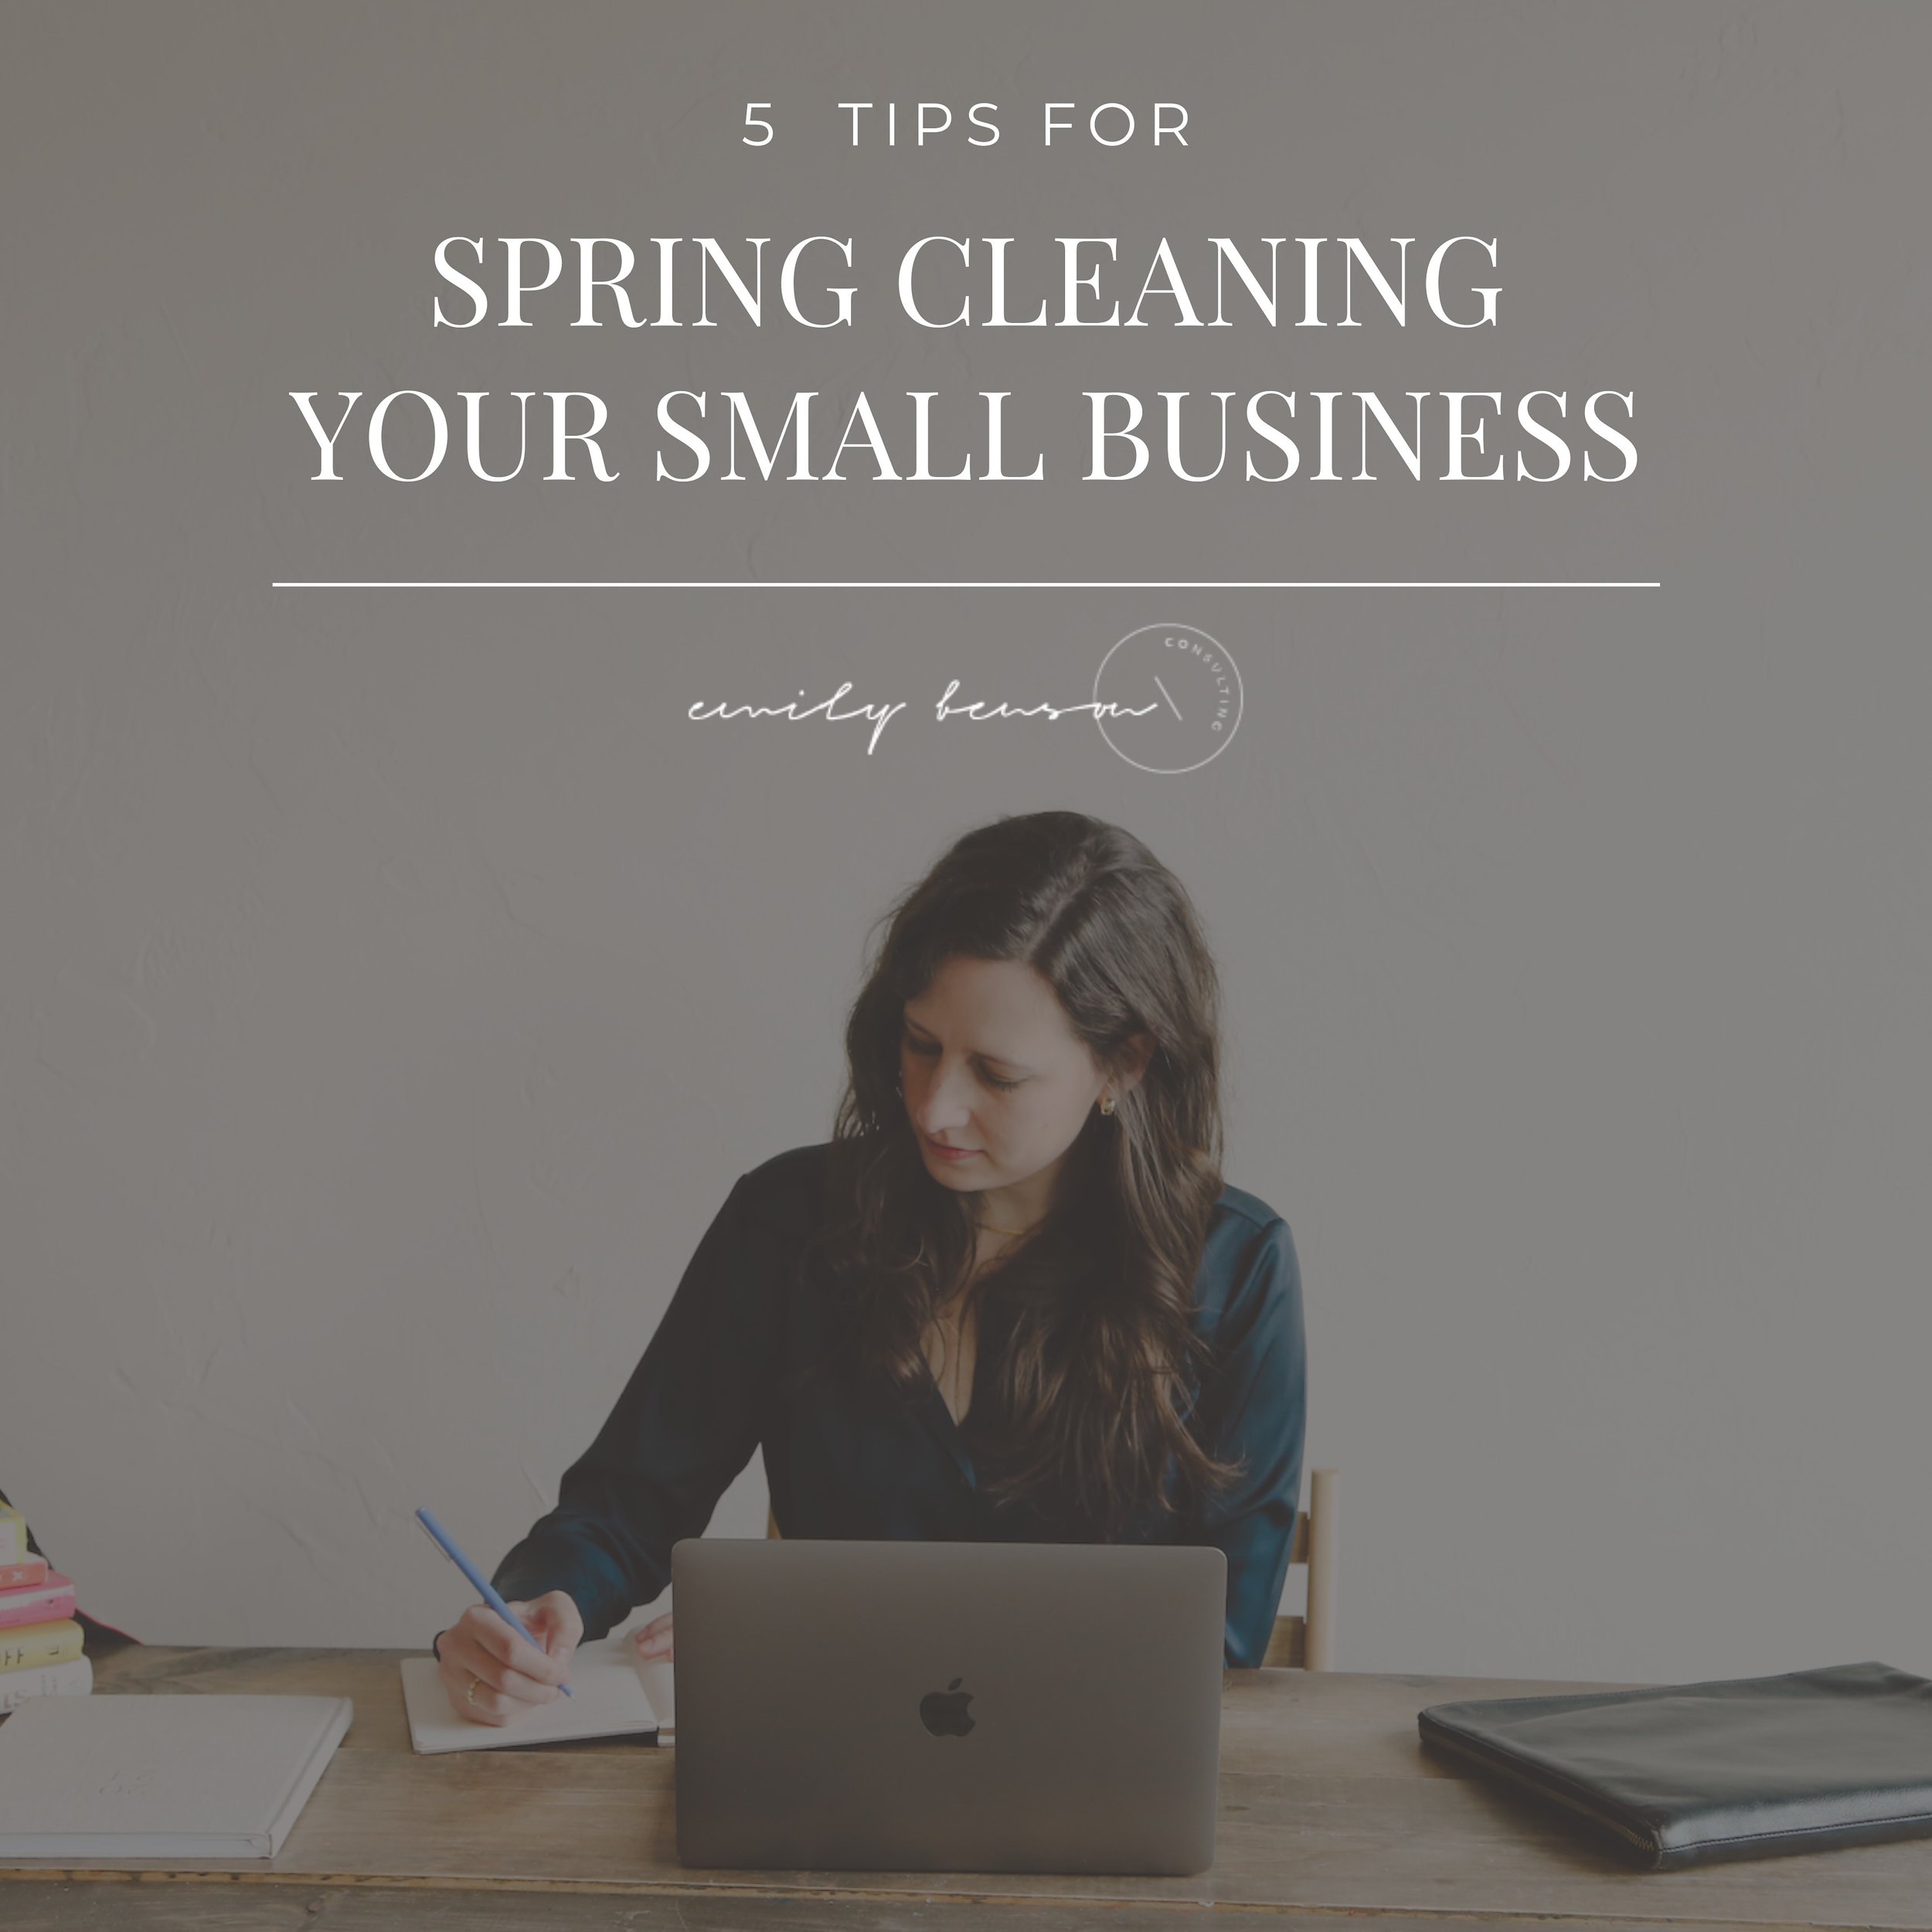 Now that we&rsquo;re a month into Spring, I find myself with the urge to clean, declutter, and improve - my home, my life, and my business. 🧹

If you&rsquo;re feeling the same pull, I&rsquo;m sharing a few simple strategies on my blog that might be 